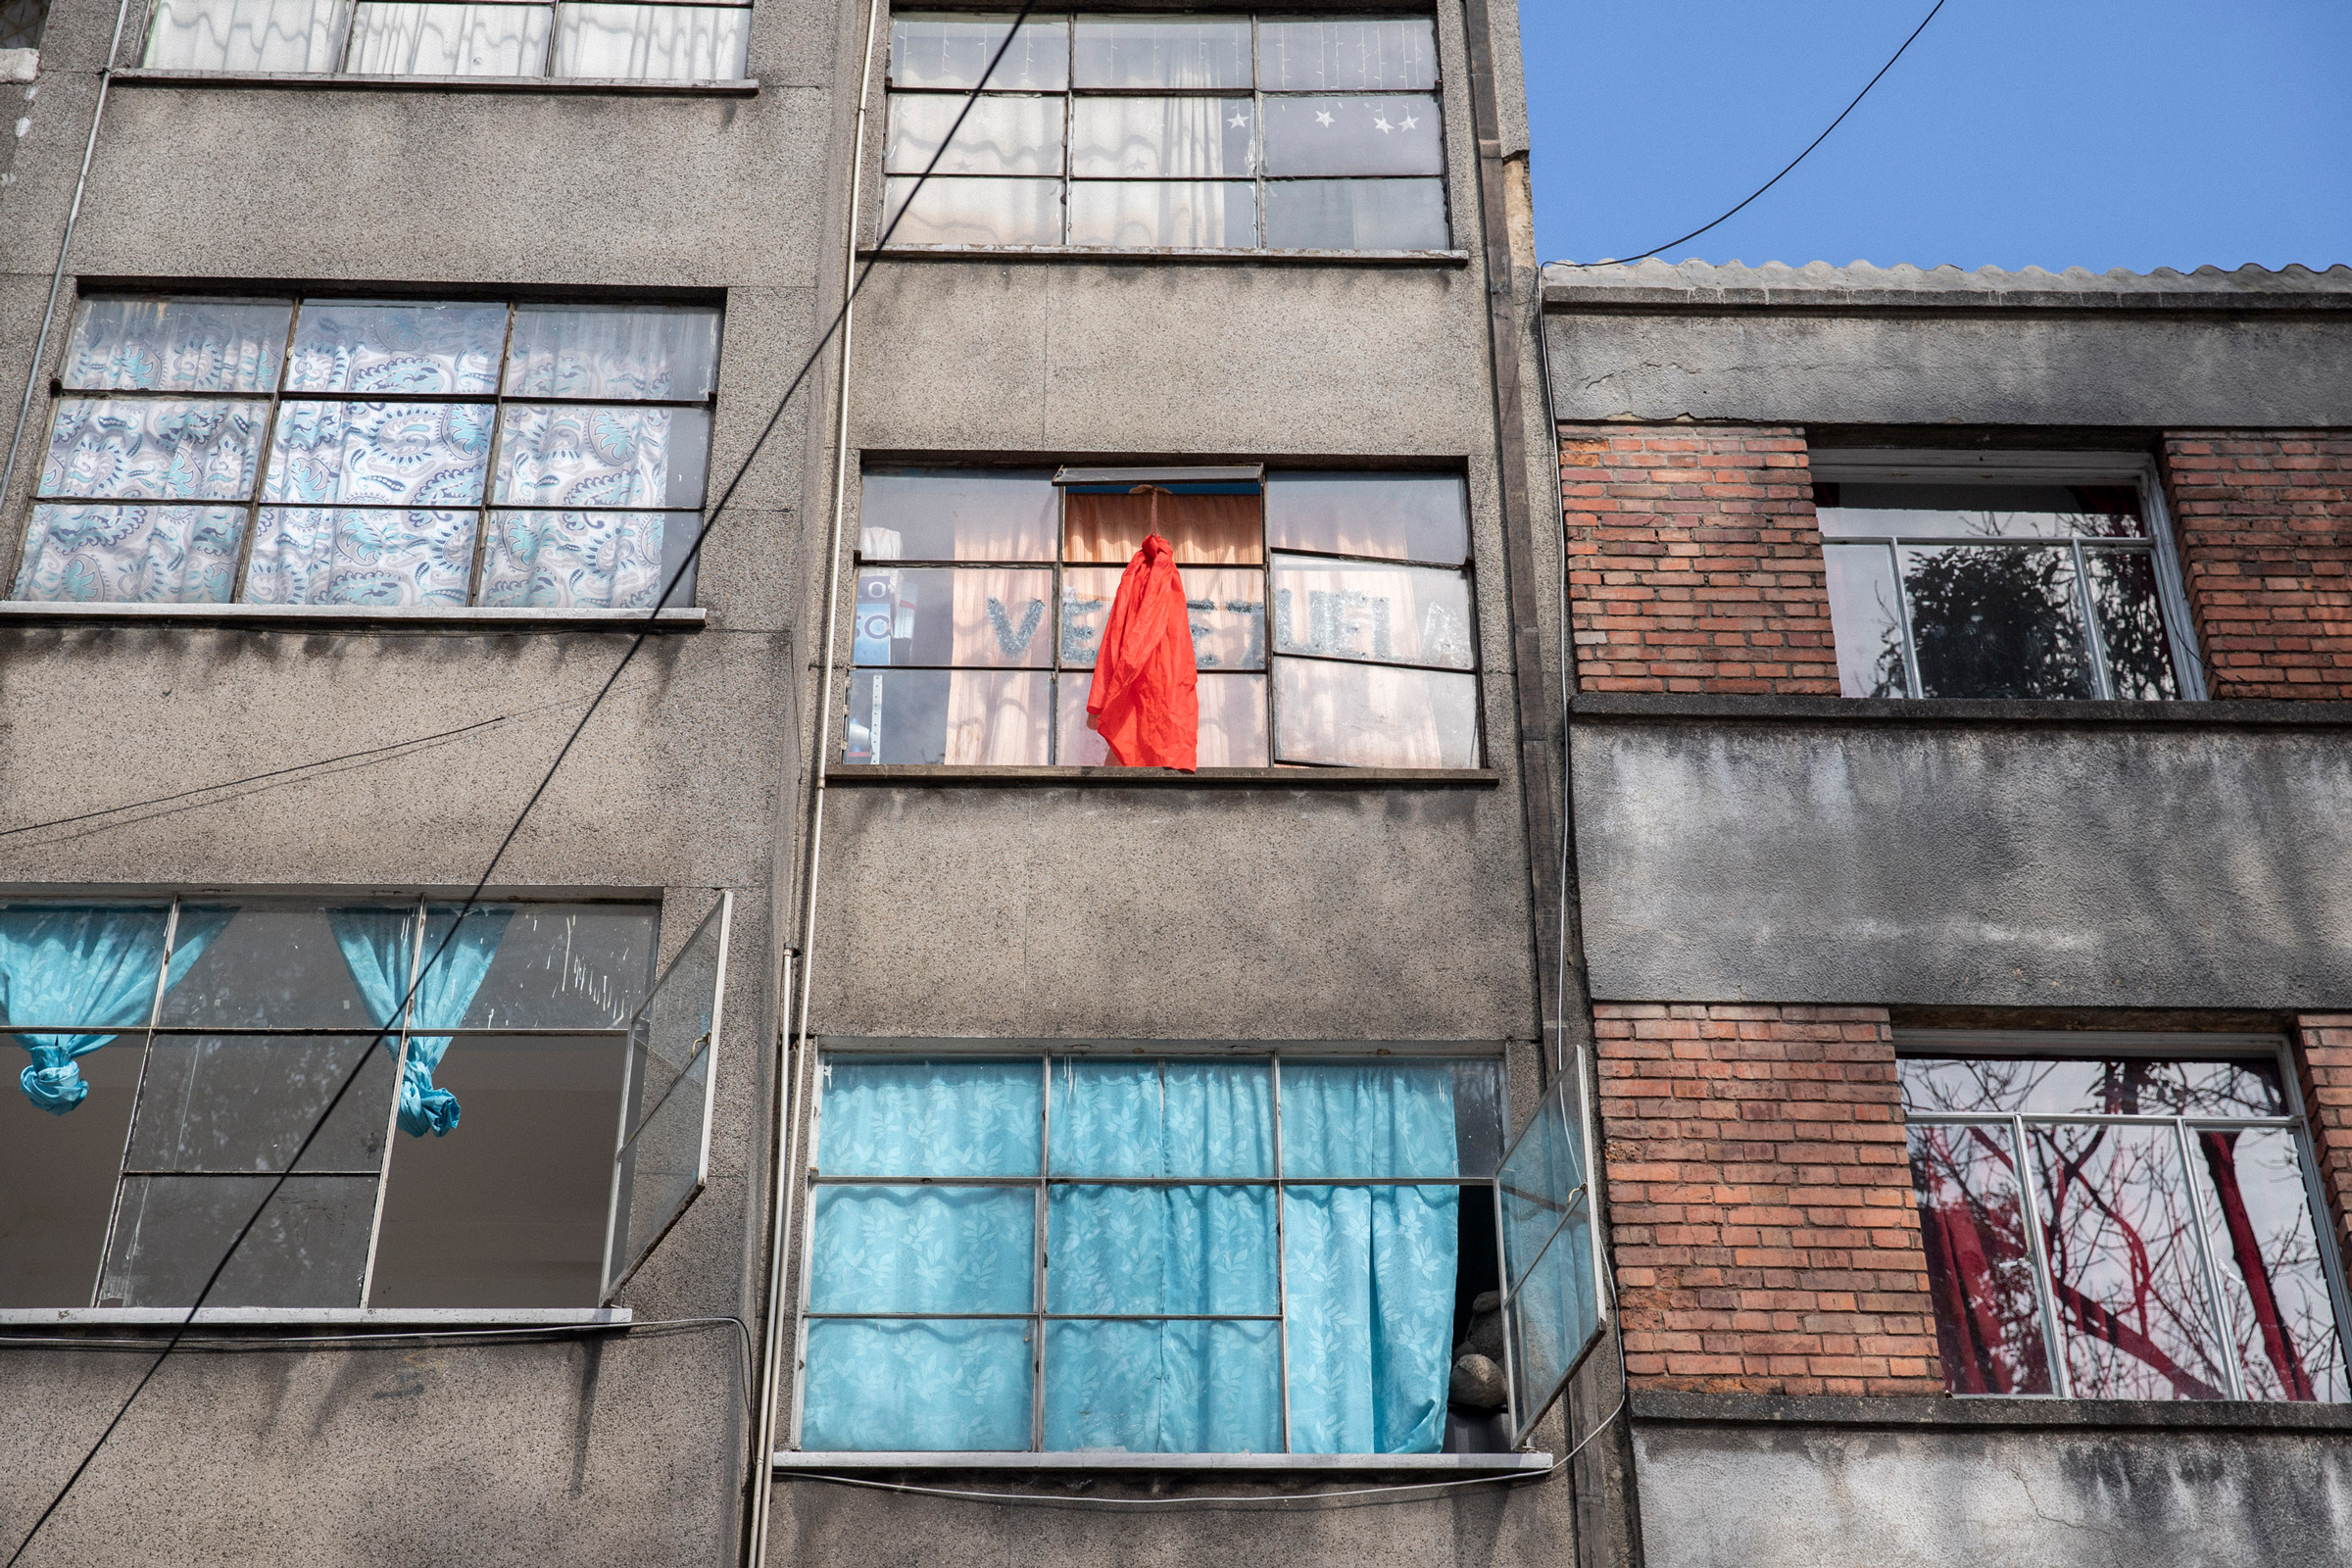 A building in Bogotá houses Venezuelan migrants. Occupants who are desperately in need of food place red fabric in their windows. (Fabiola Ferrero—National Geographic Society)